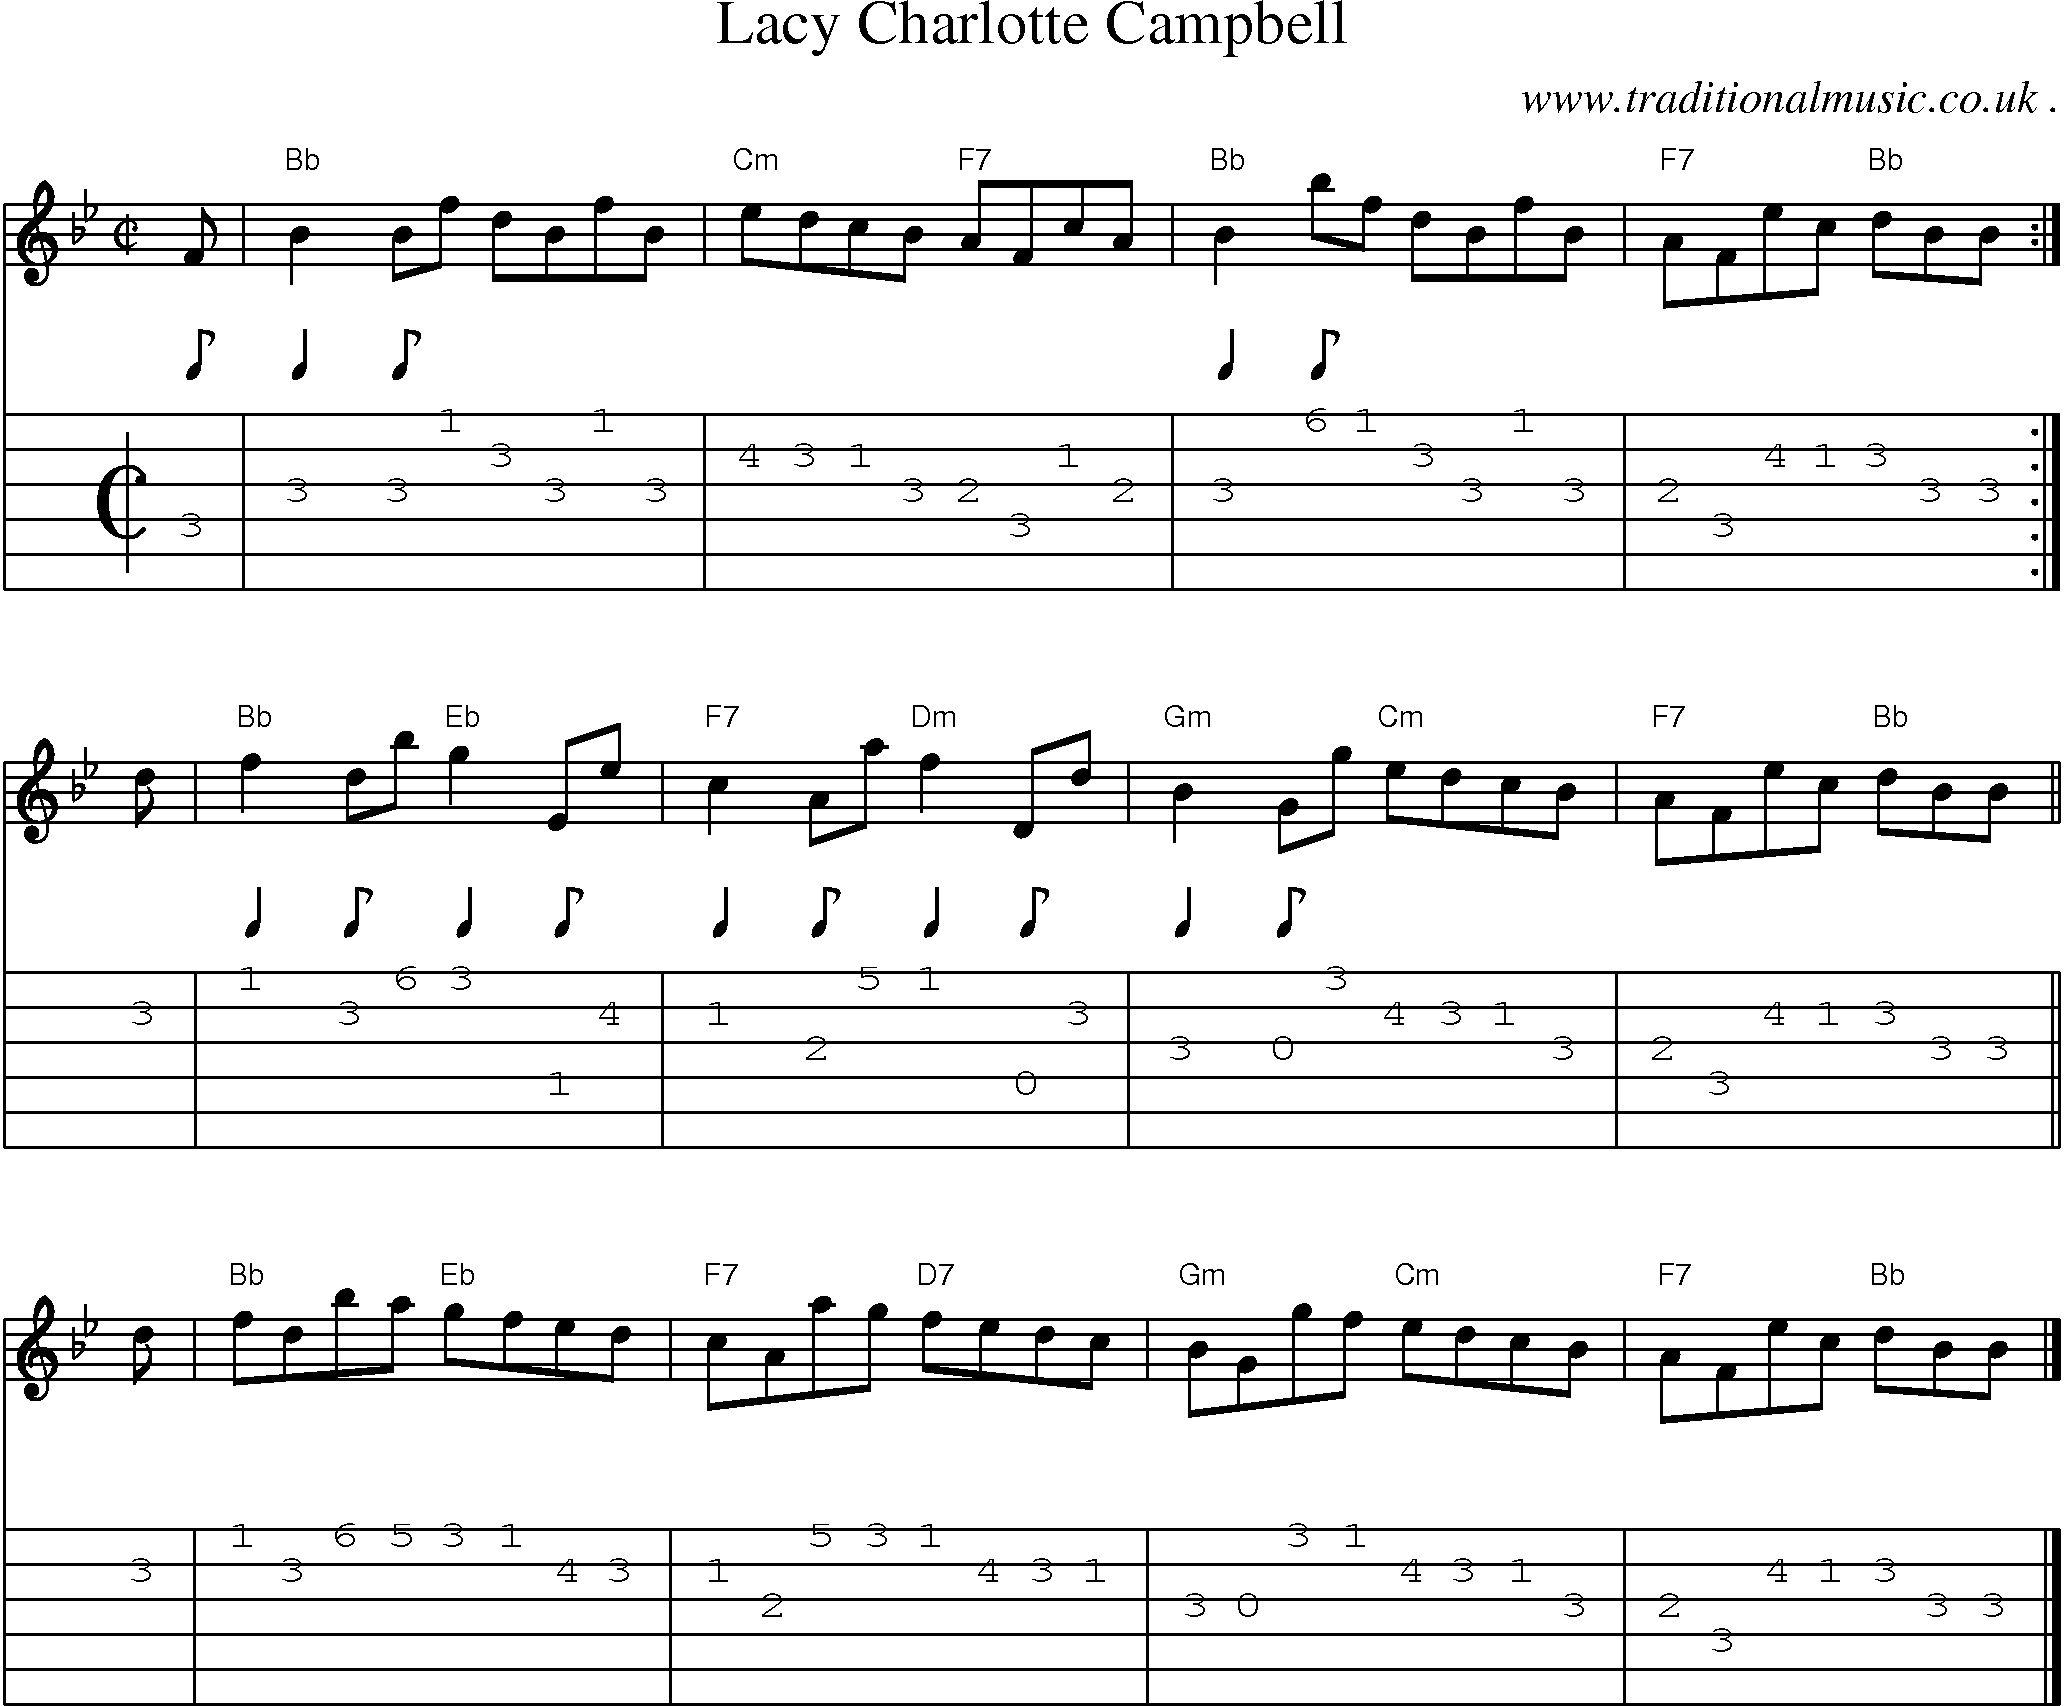 Sheet-music  score, Chords and Guitar Tabs for Lacy Charlotte Campbell